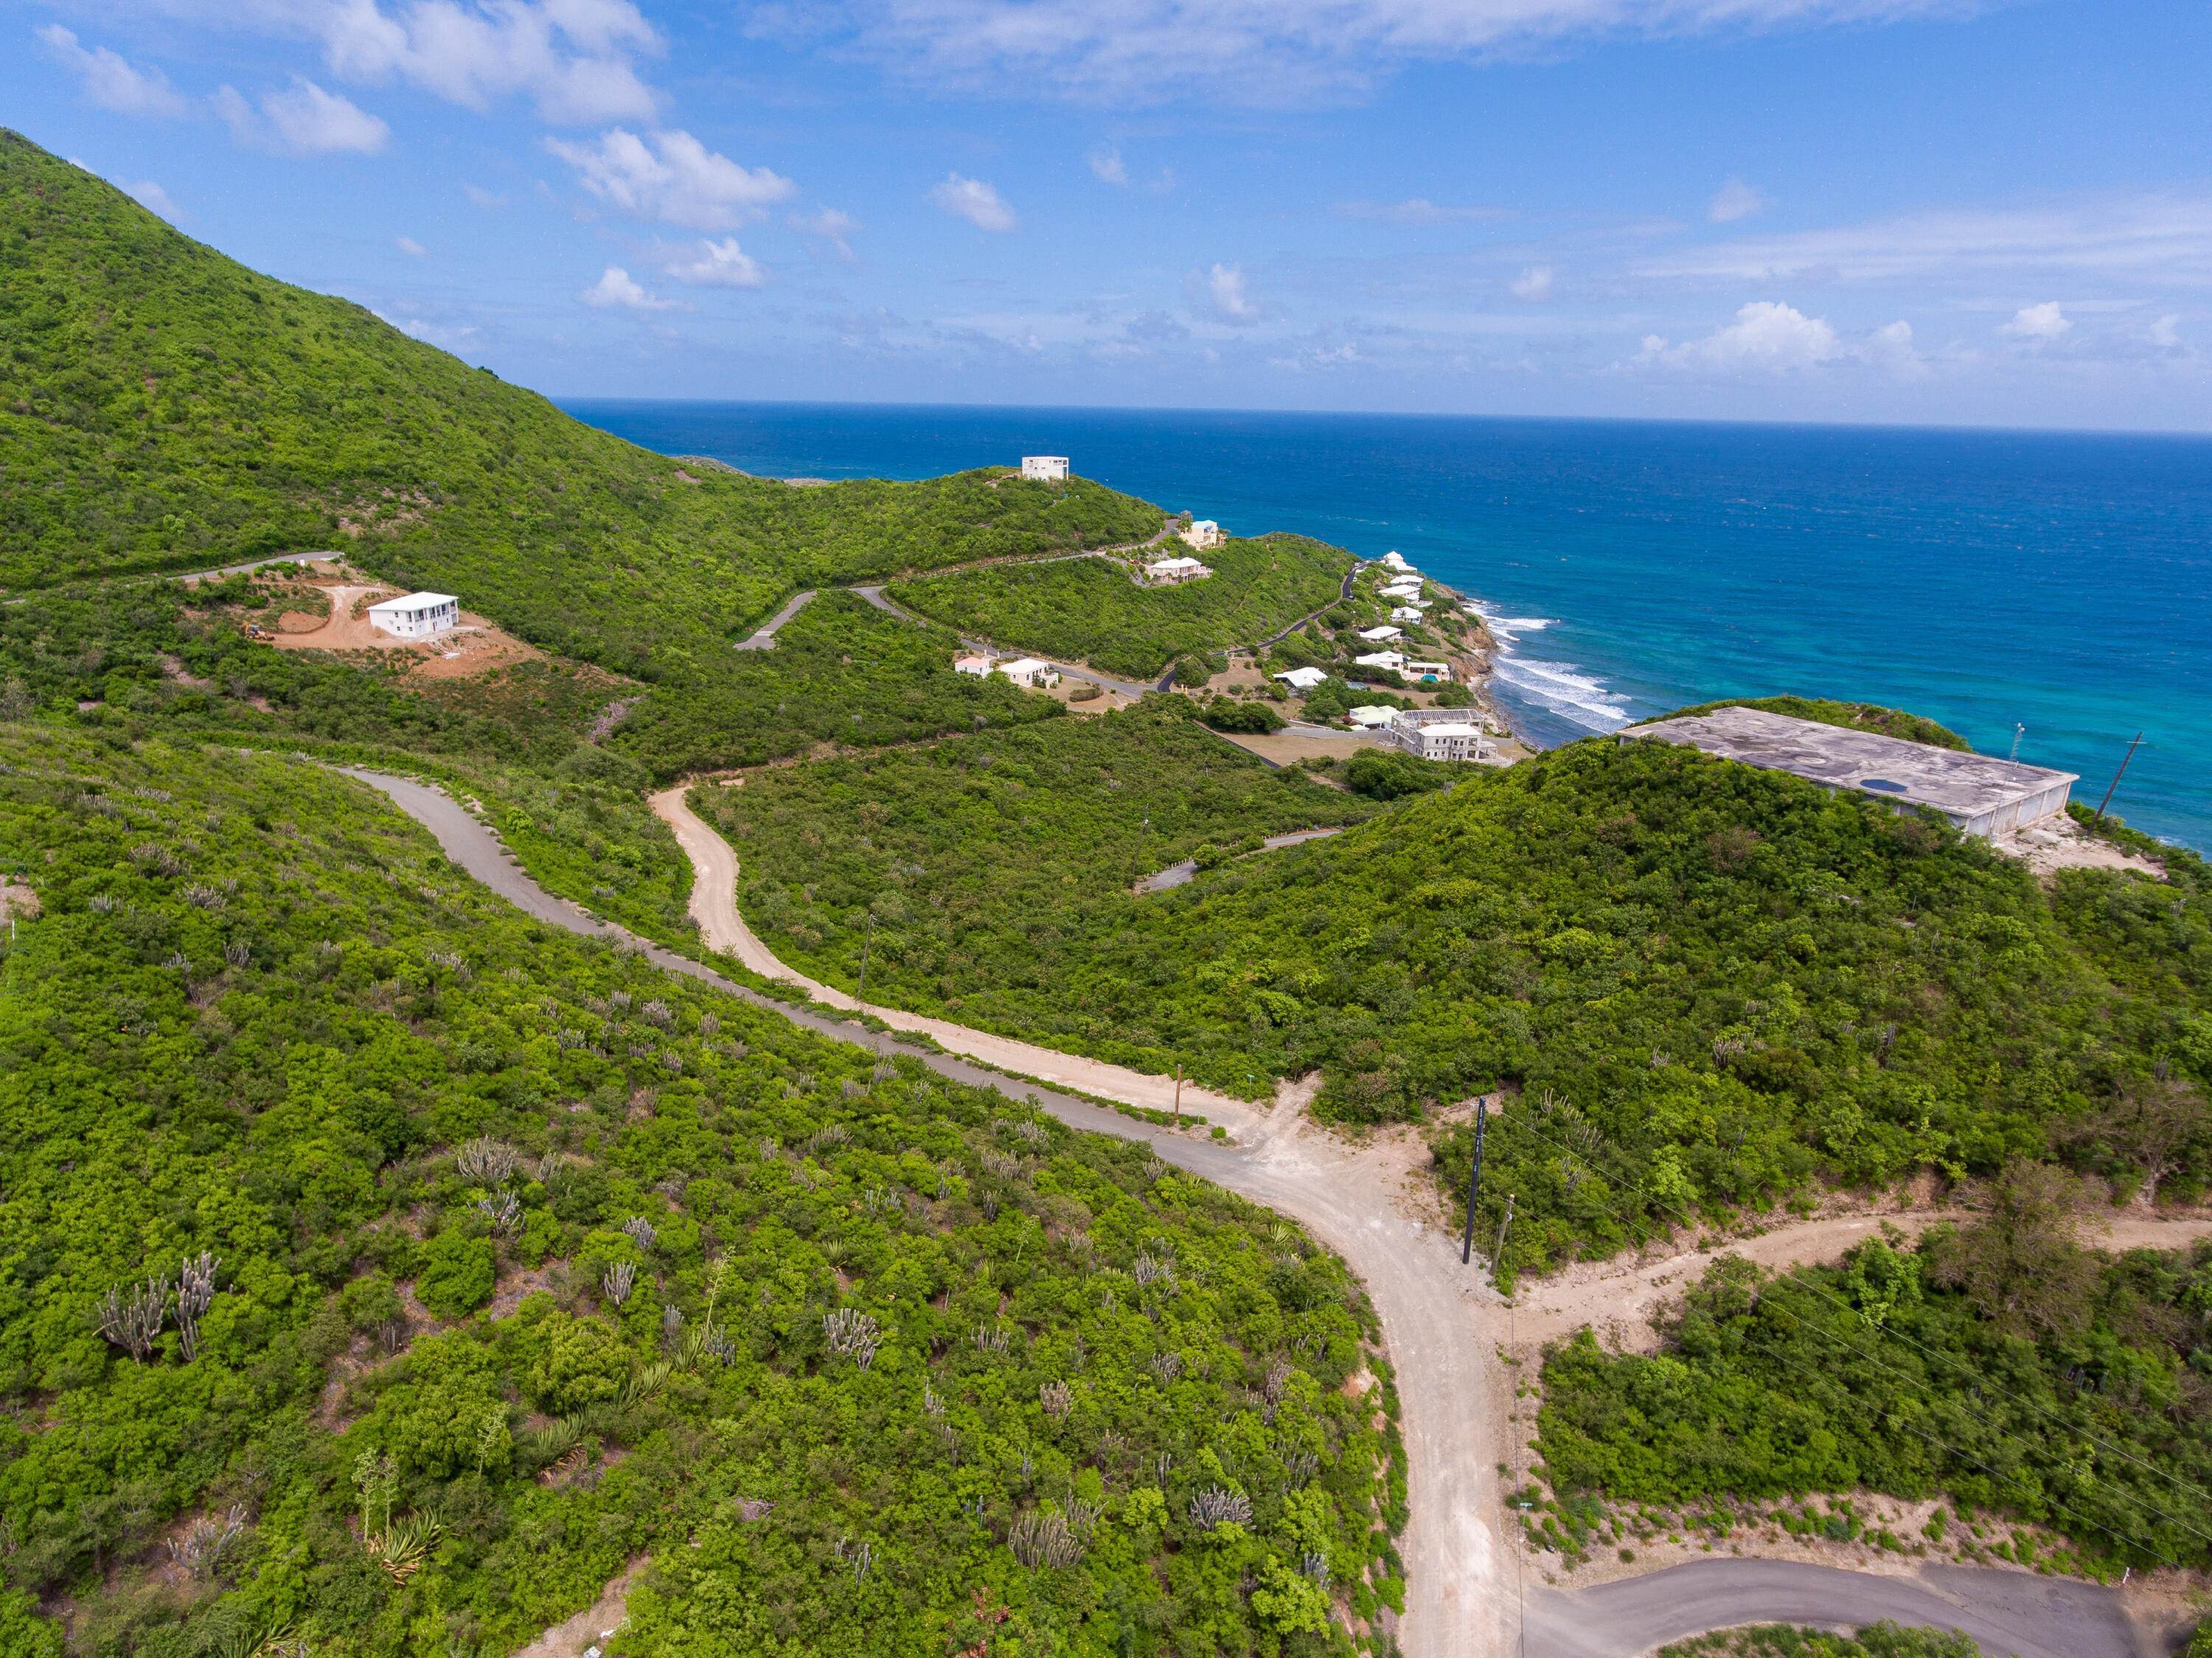 Land for Sale at 94 South Grapetree EB St Croix, Virgin Islands 00820 United States Virgin Islands